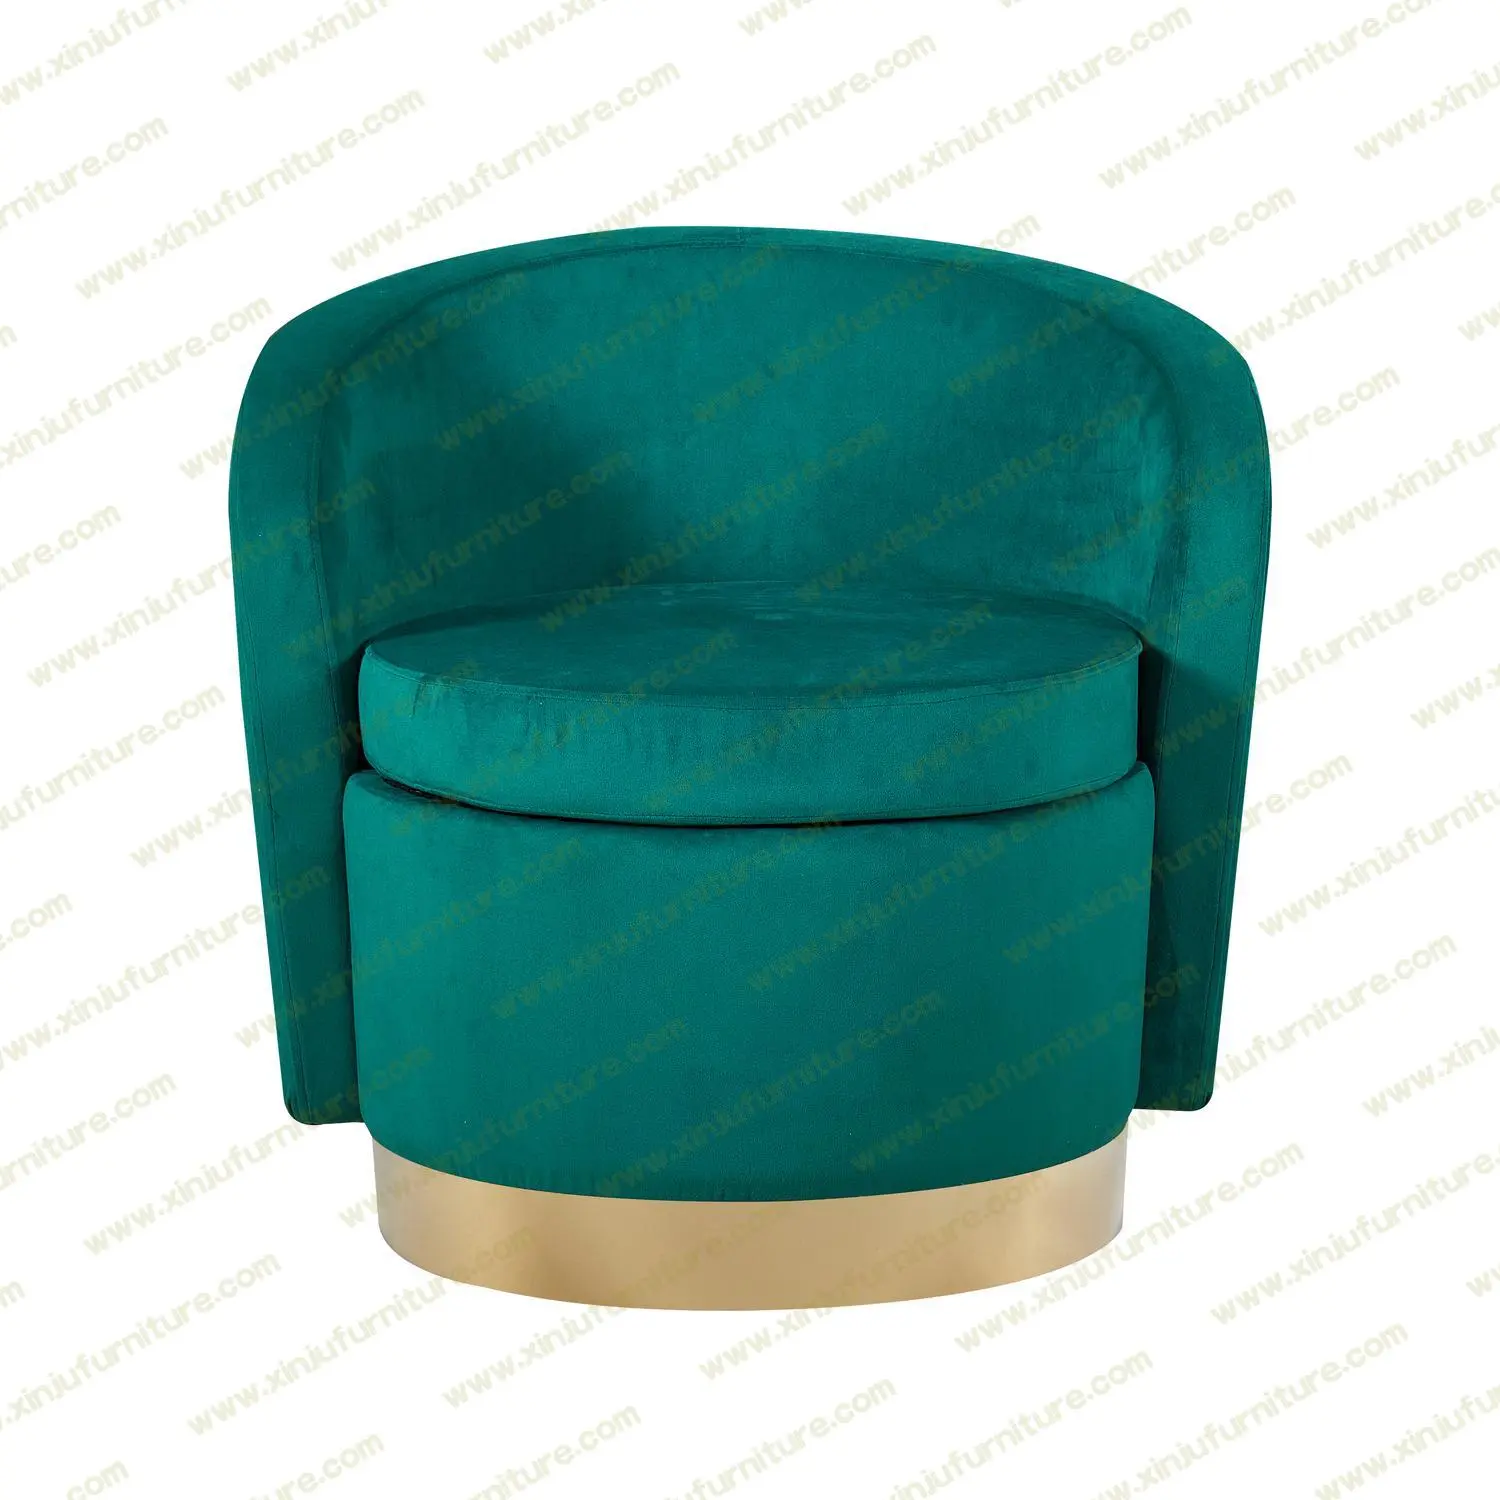 Durable and beautiful Ottoman chair